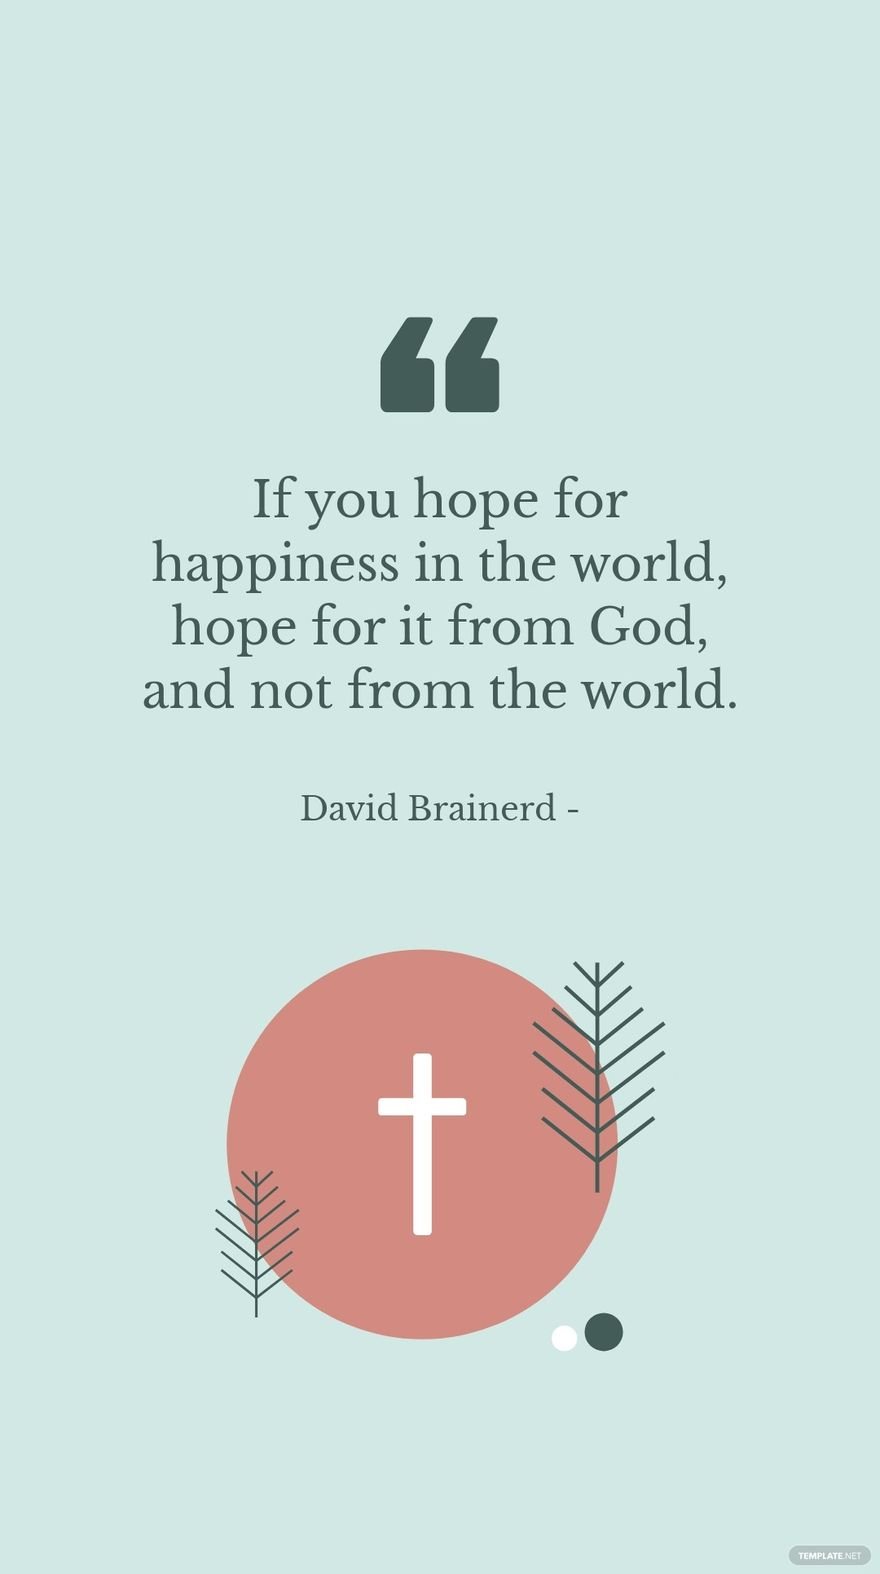 David Brainerd - If you hope for happiness in the world, hope for it from God, and not from the world.